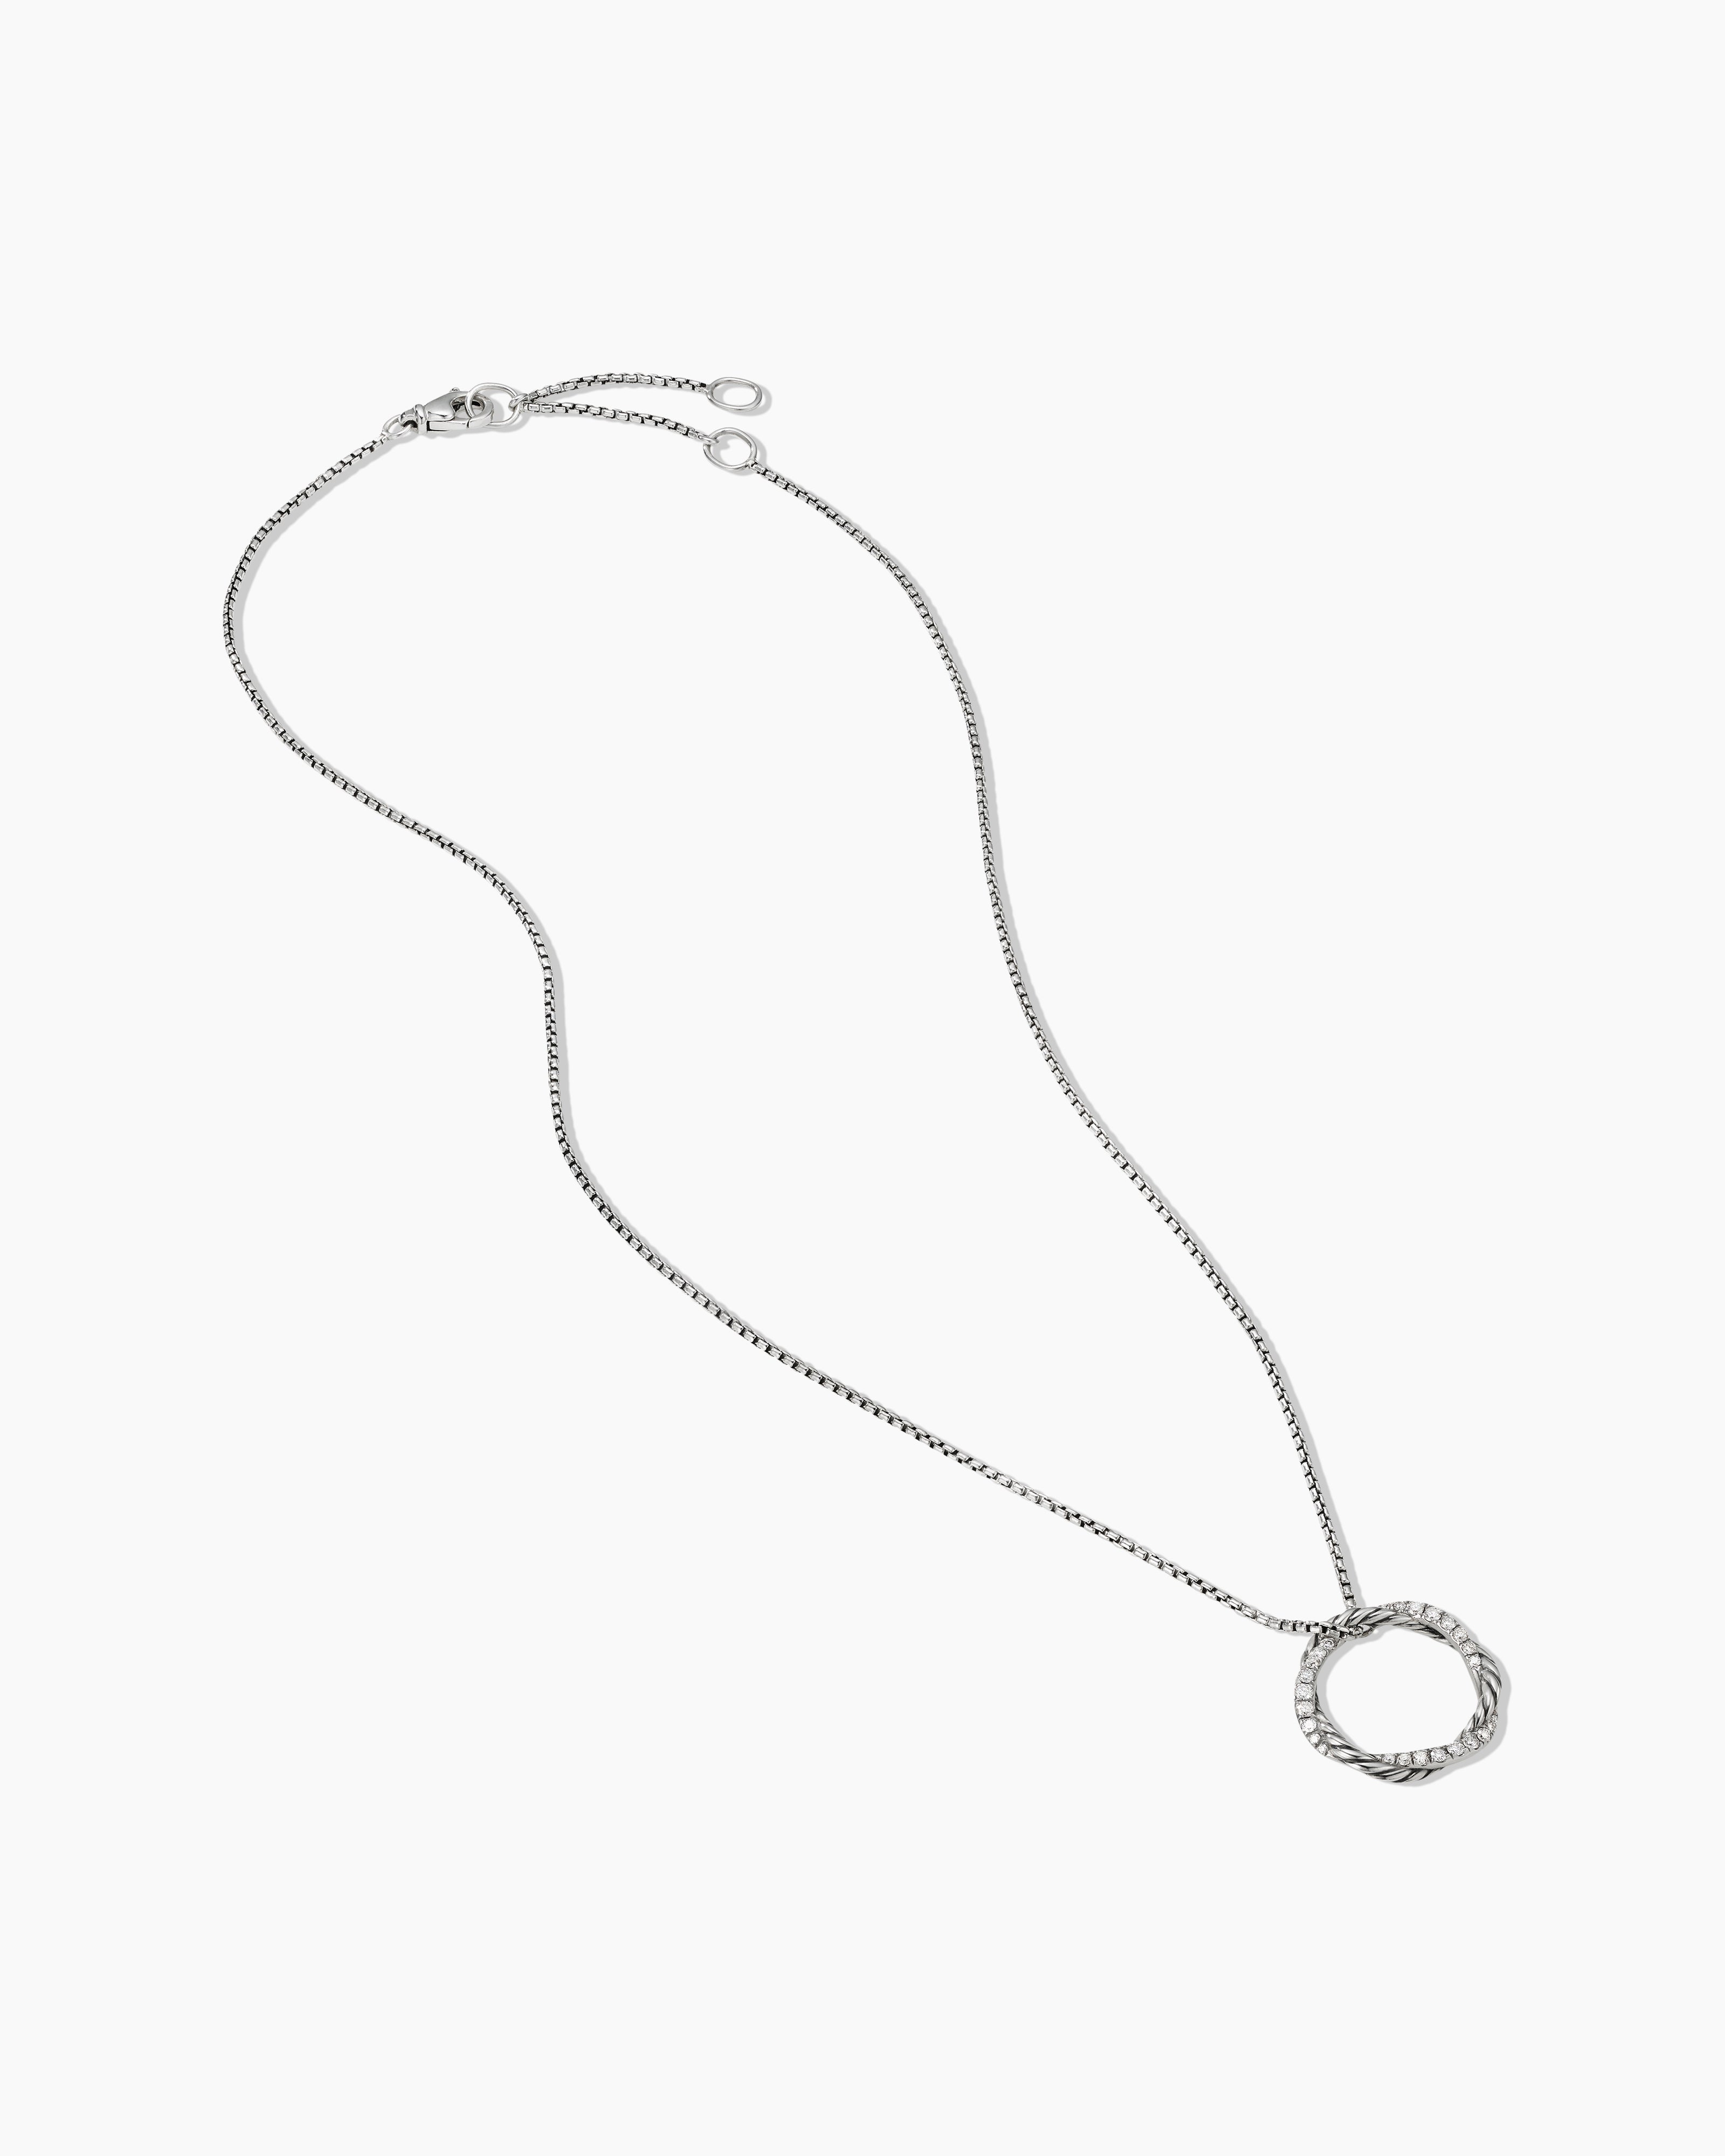 Infinity Pendant Necklace in Sterling Silver with Diamonds, 13mm